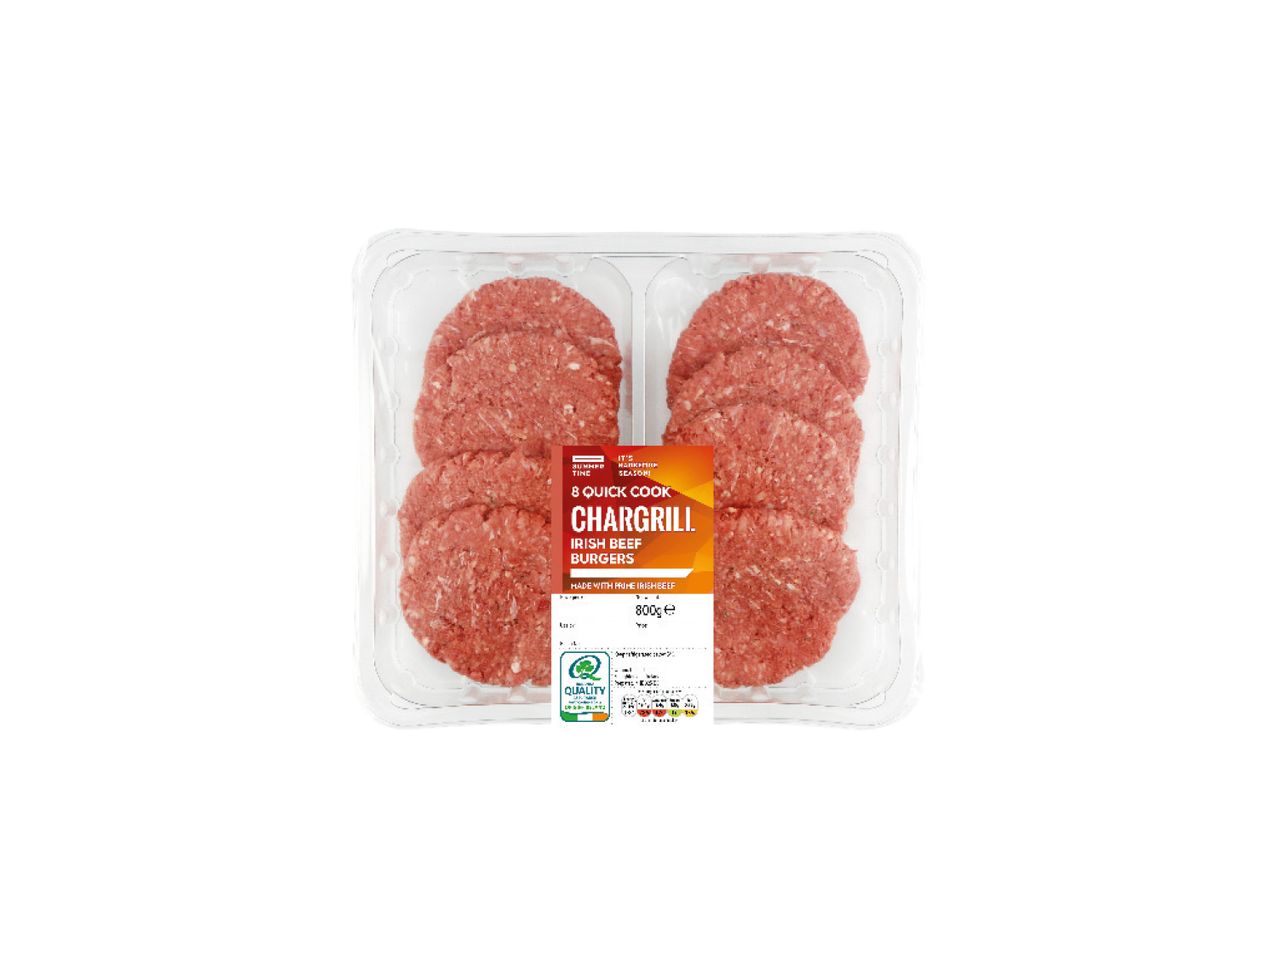 Go to full screen view: Irish Quick Cook Chargrill Beef Burgers - Image 1